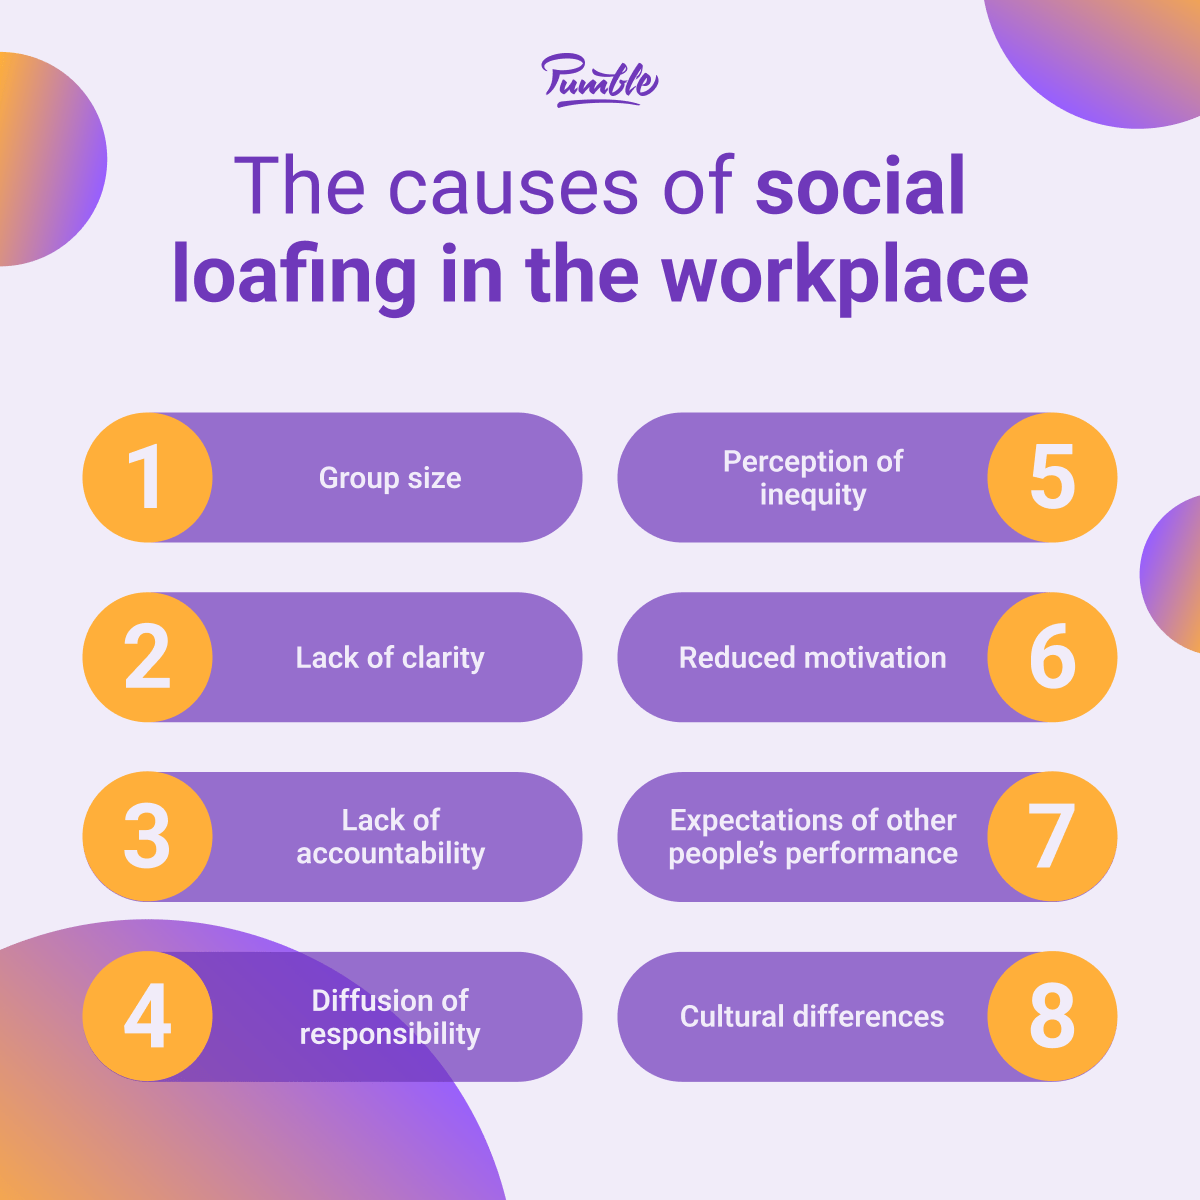 The causes of social loafing in the workplace